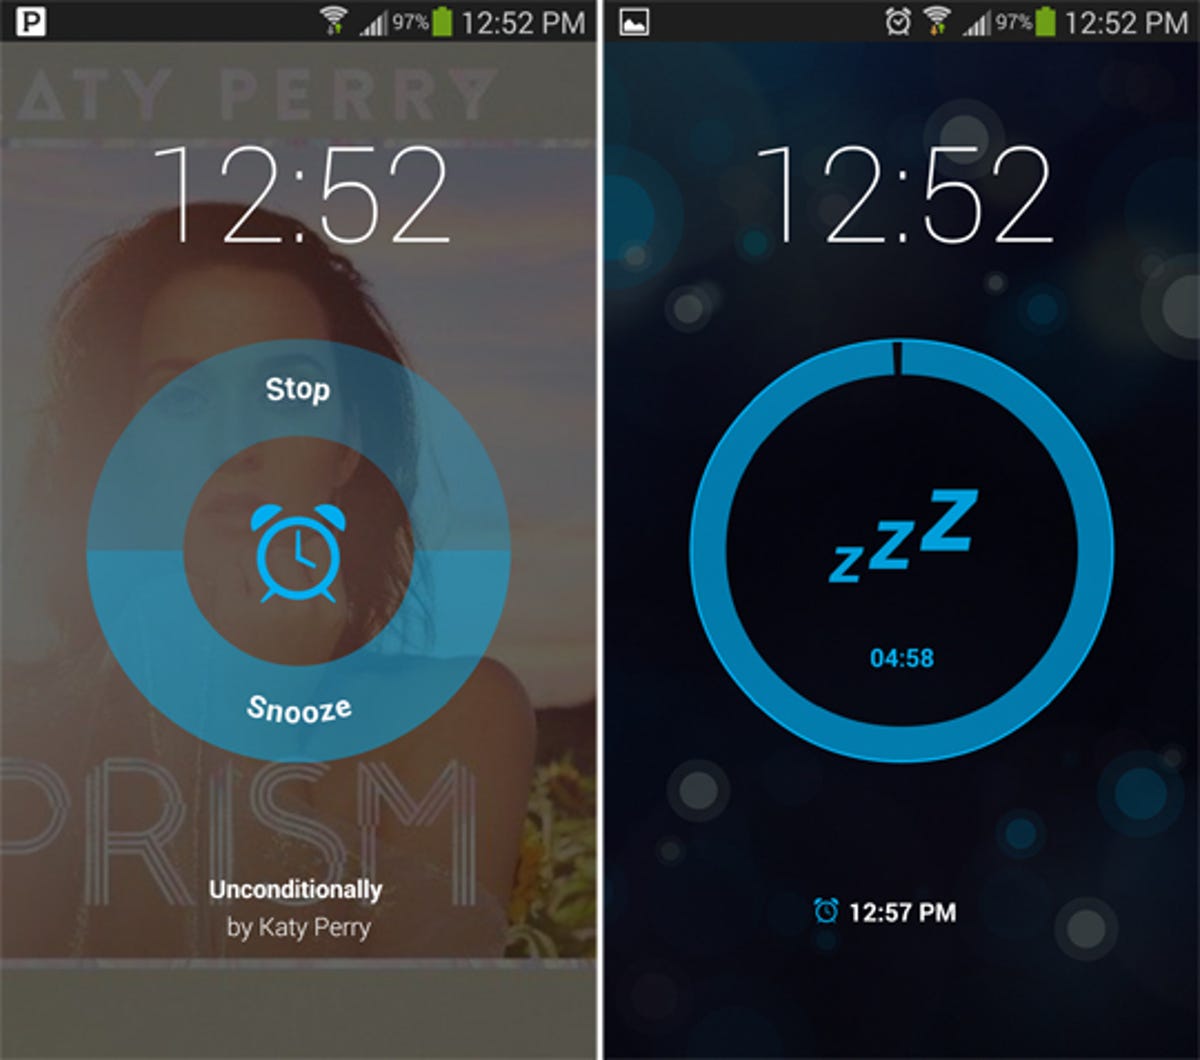 Pandora for Android alarm stop/snooze